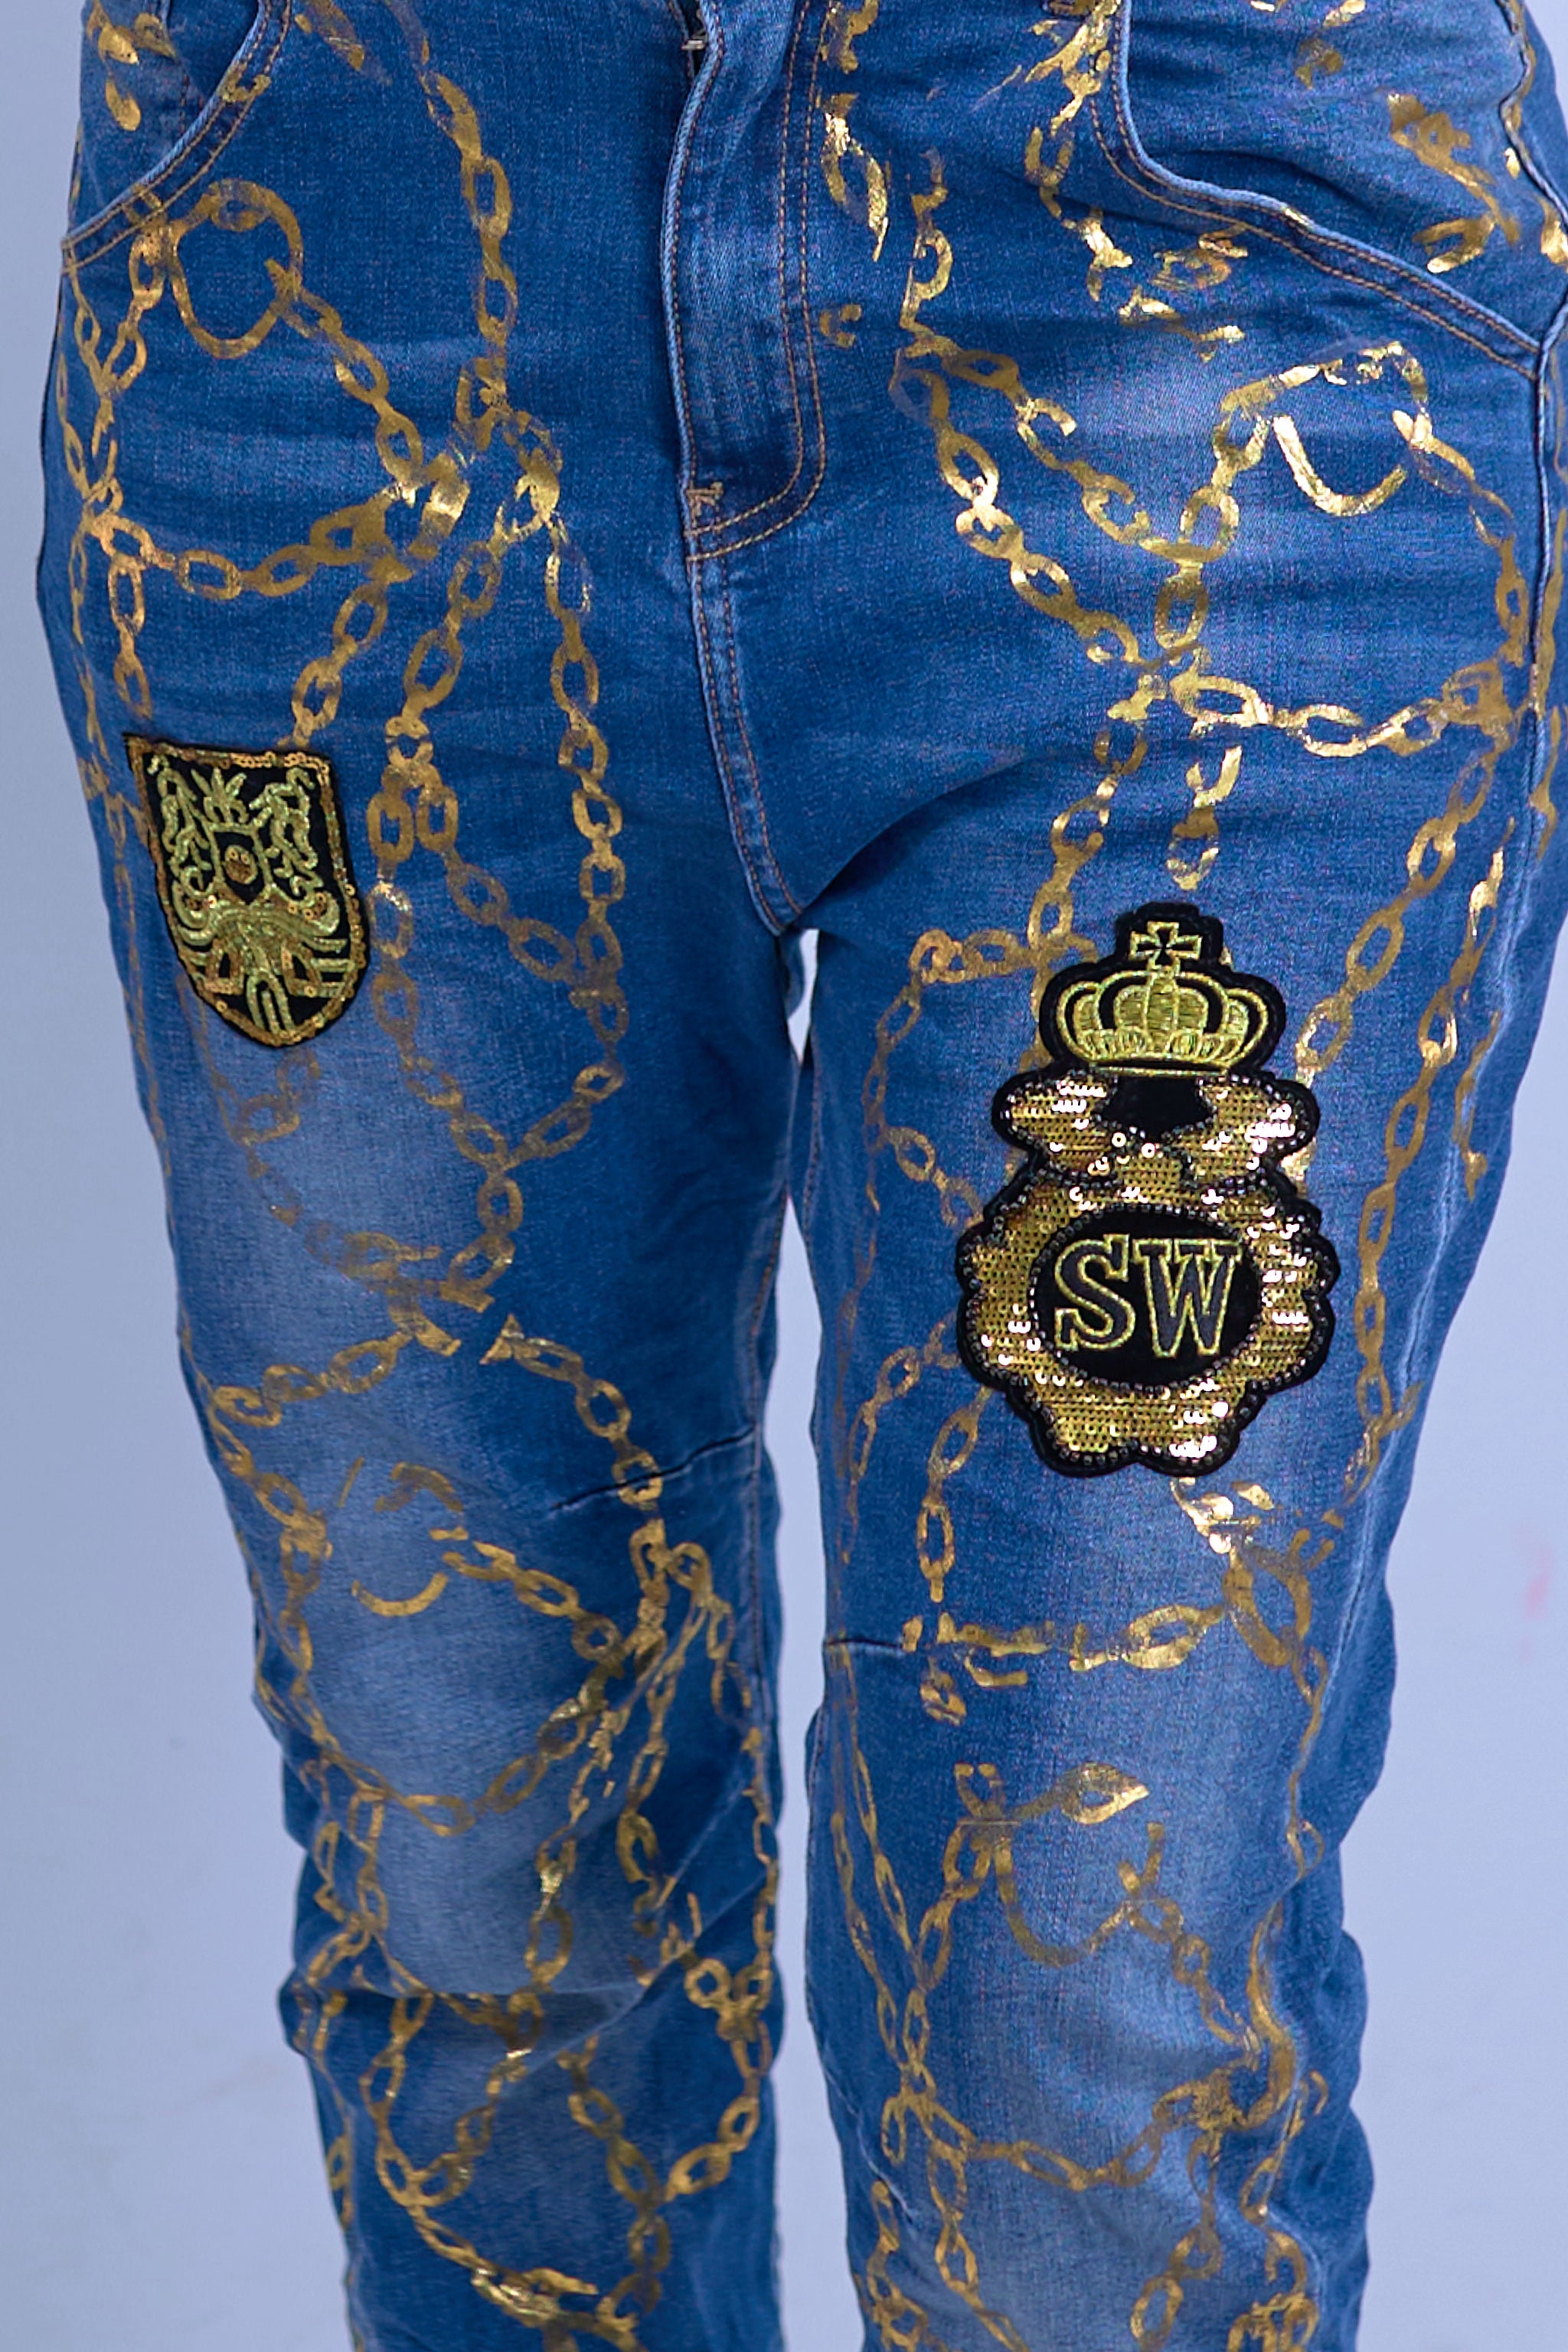 Jeans with gold details, denim-gold